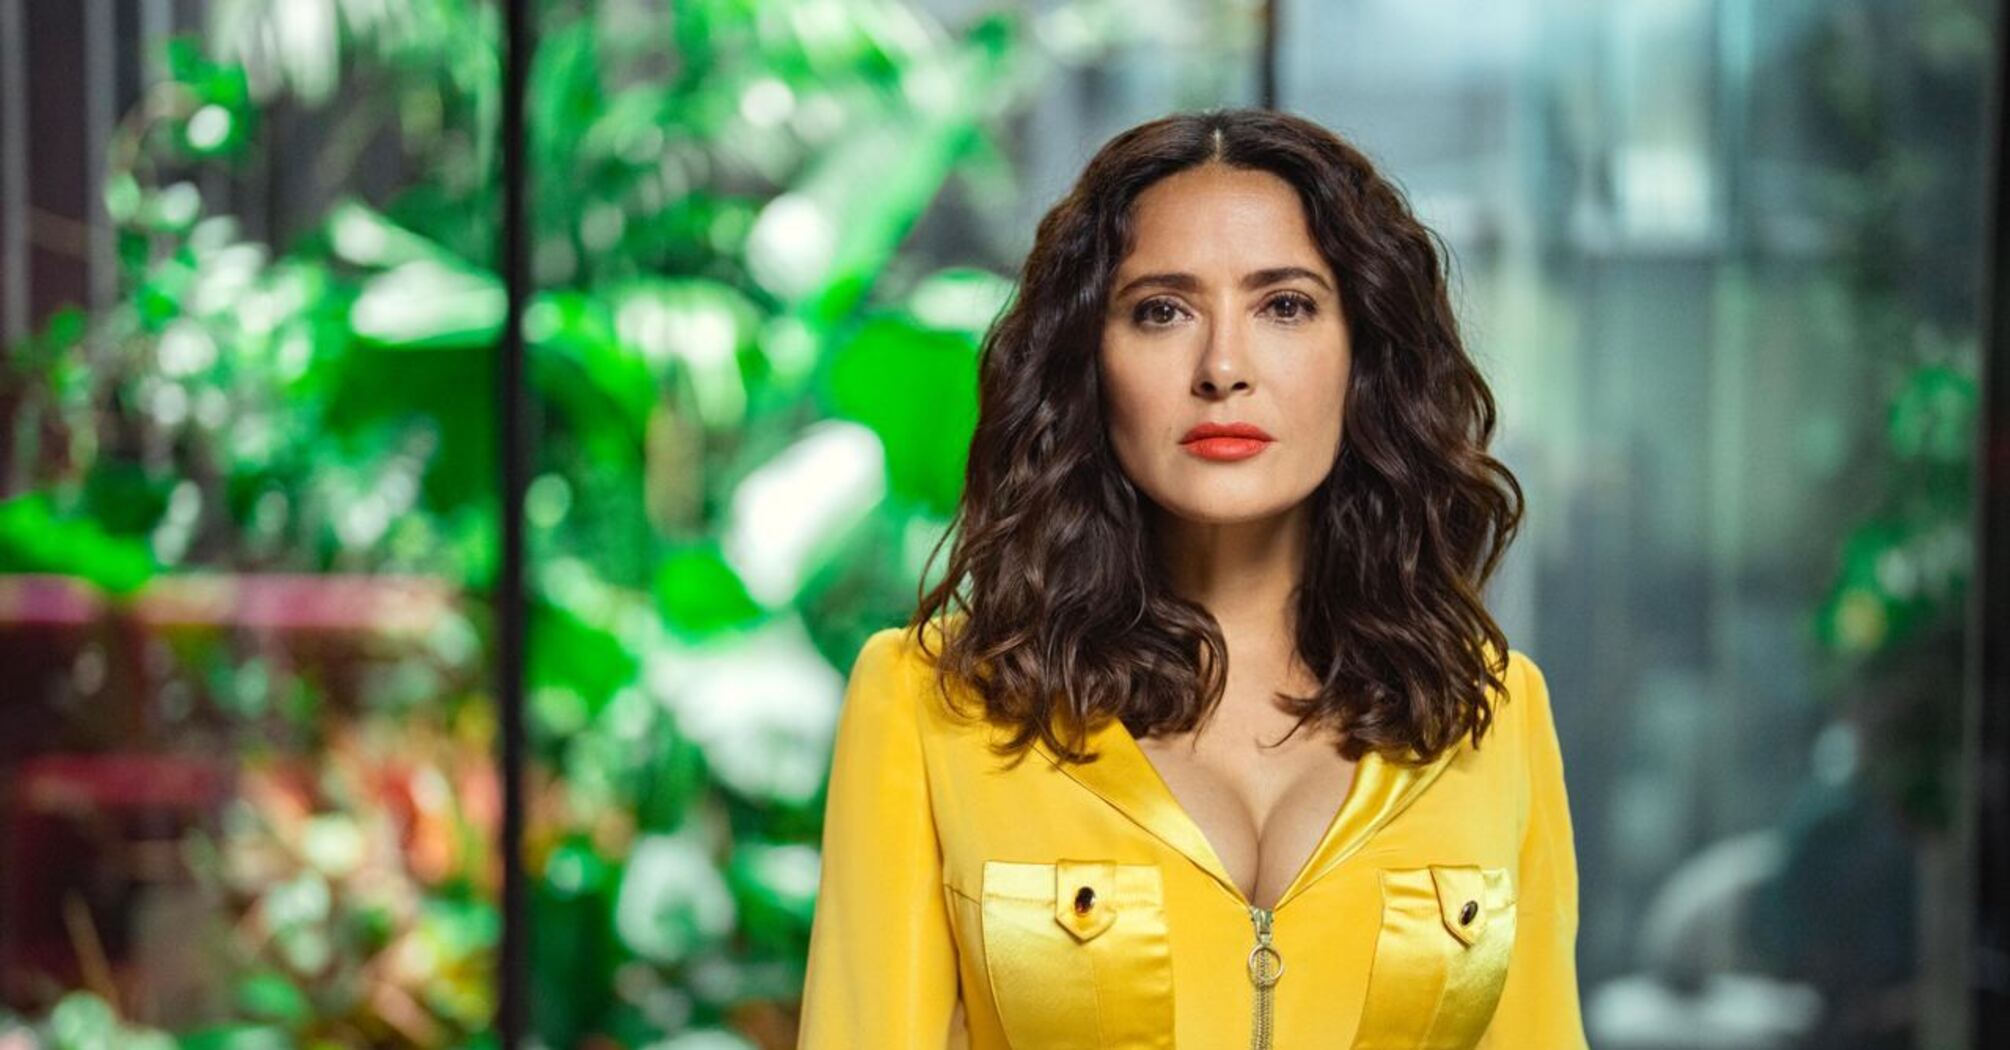 5 unknown facts about the charismatic Salma Hayek